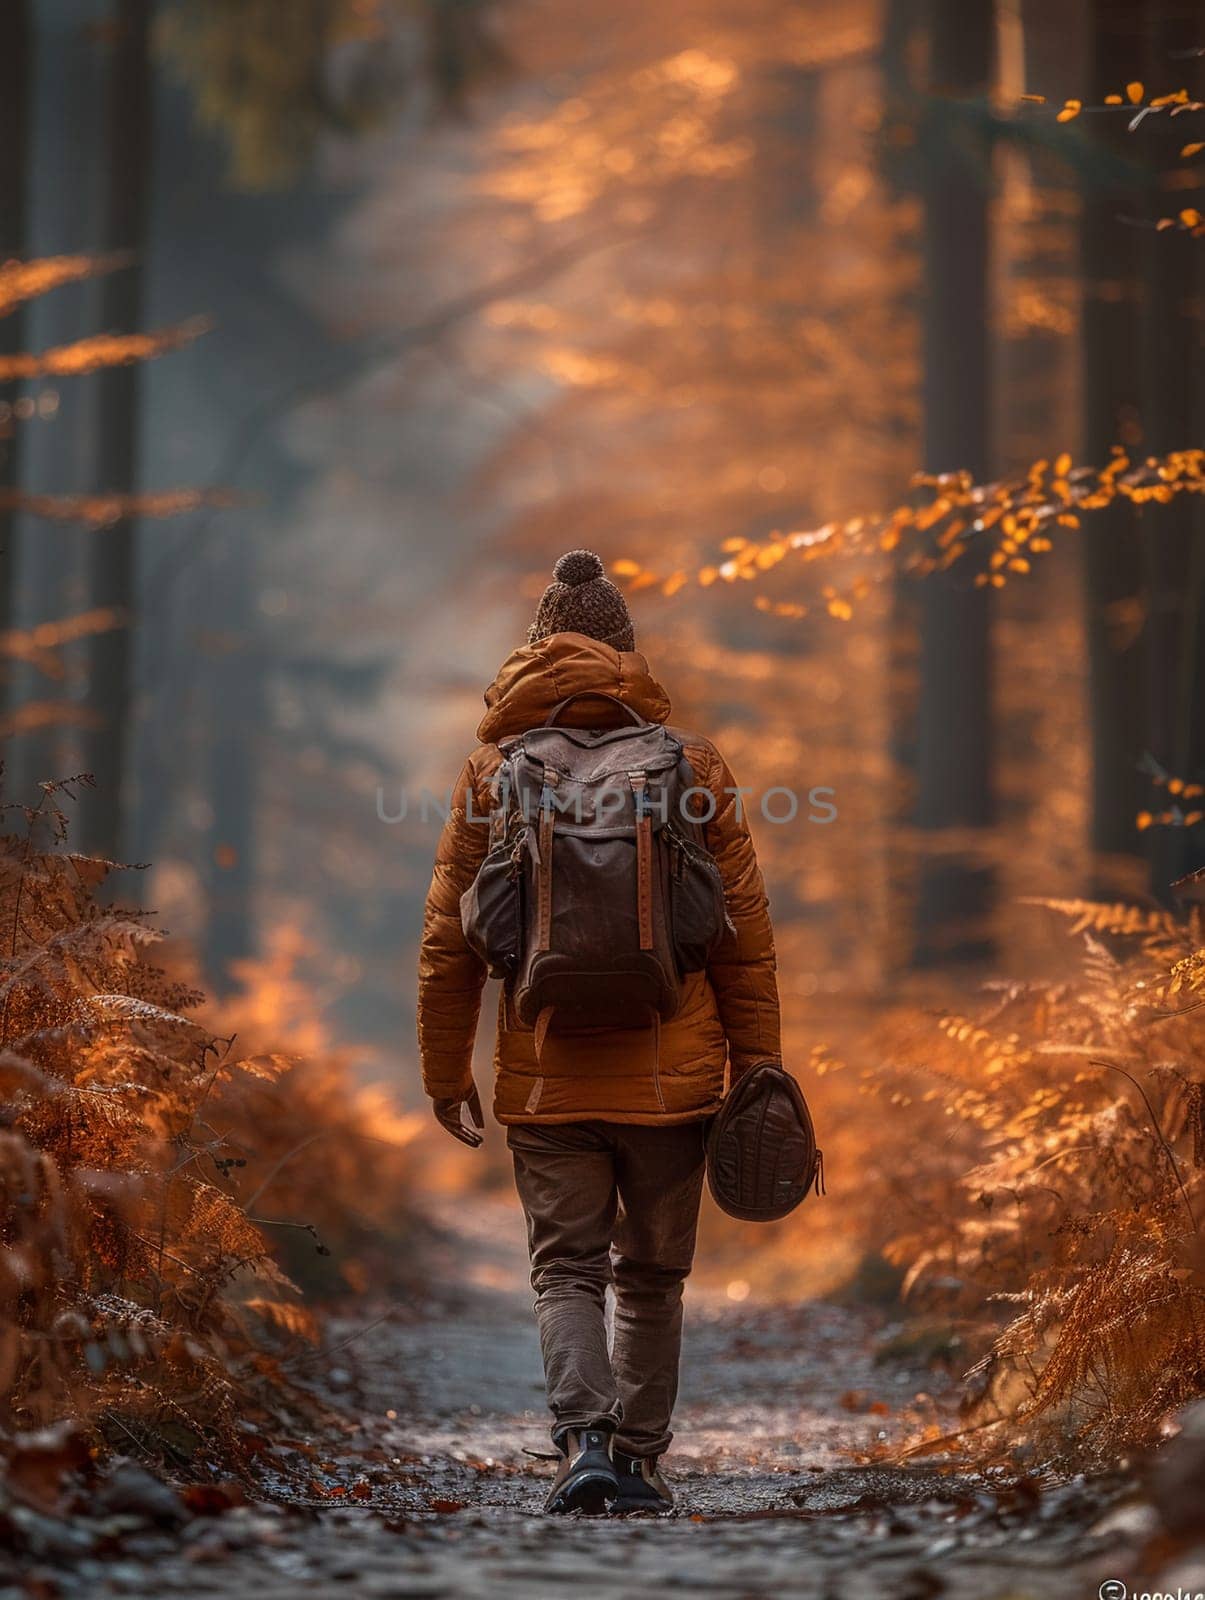 Person walking with a backpack through an autumn forest, illustrating leisure and nature.